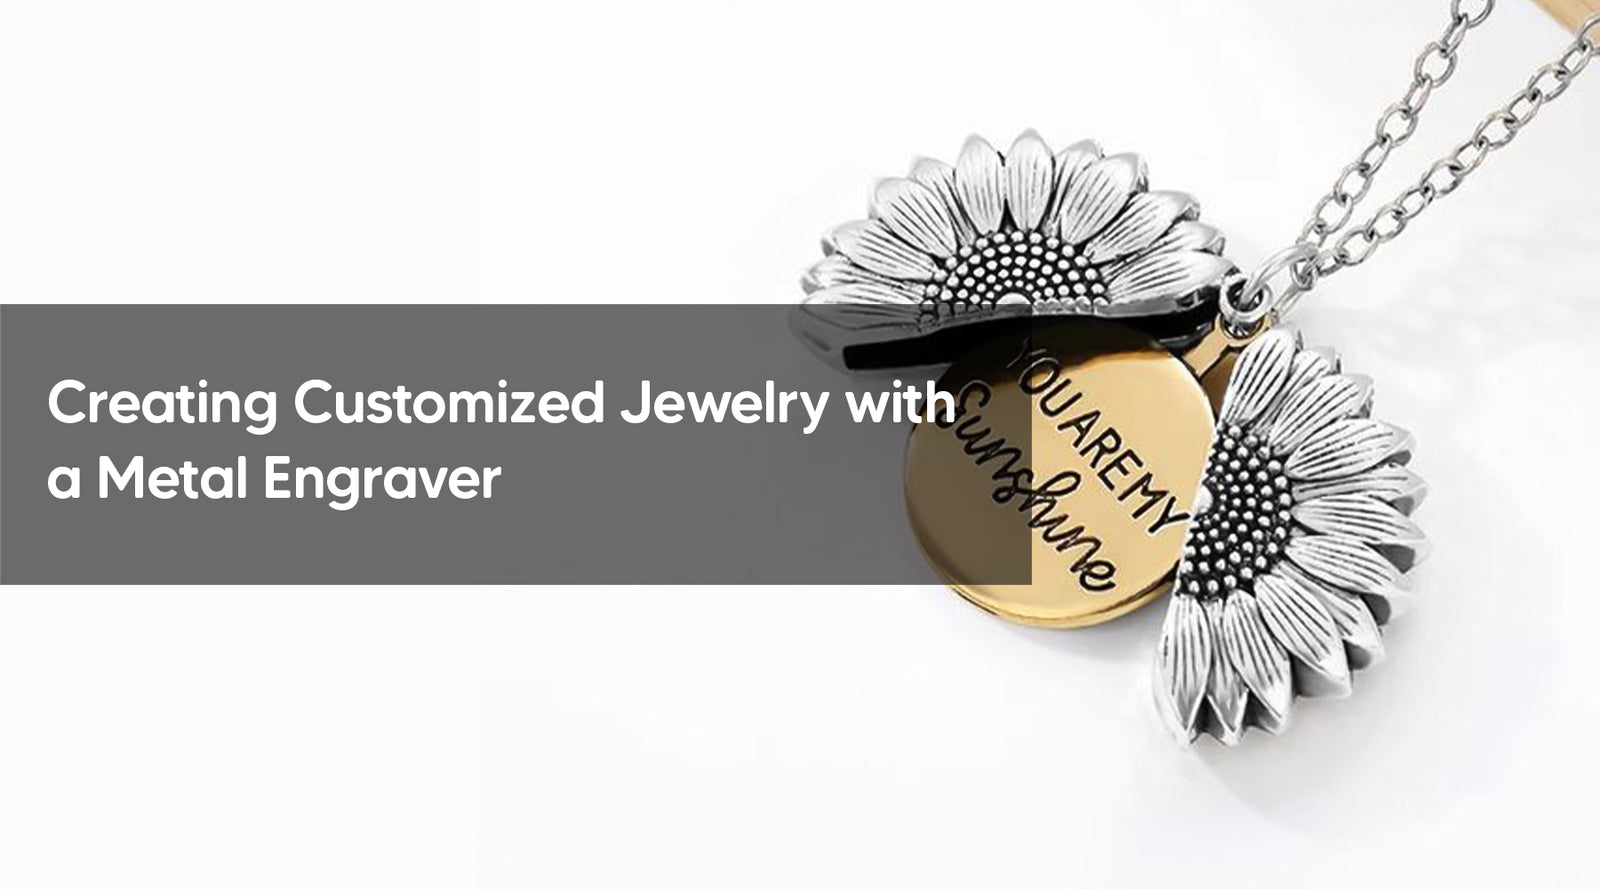 Creating Customized Jewelry with a Metal Engraver